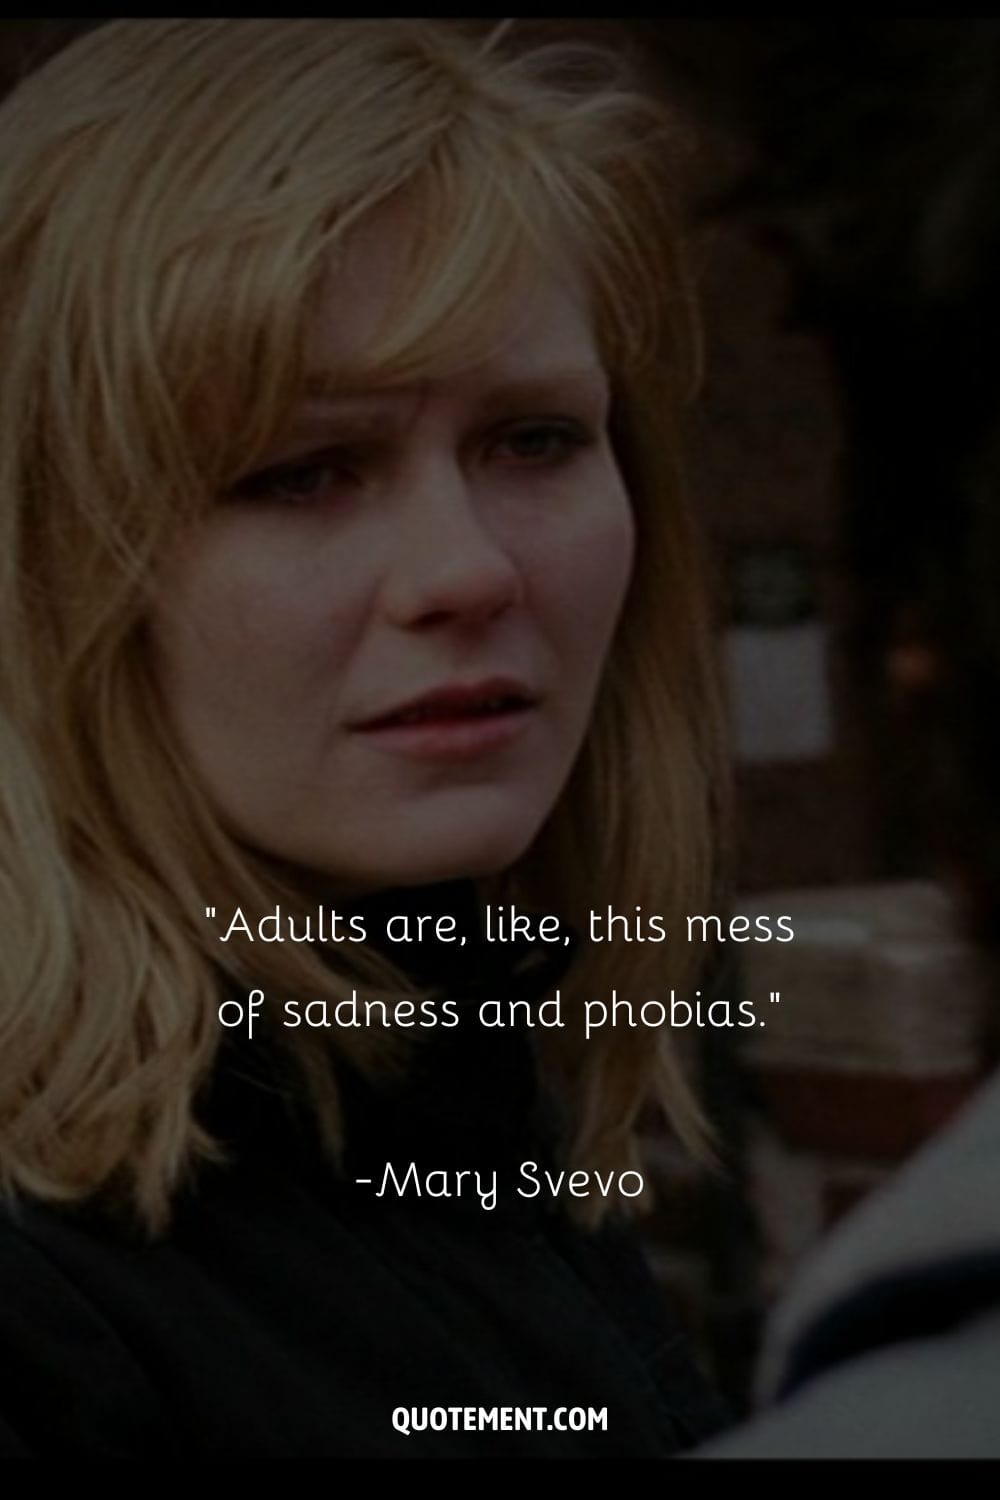 Mary Svevo representing the most famous Eternal Sunshine Of The Spotless Mind quote.